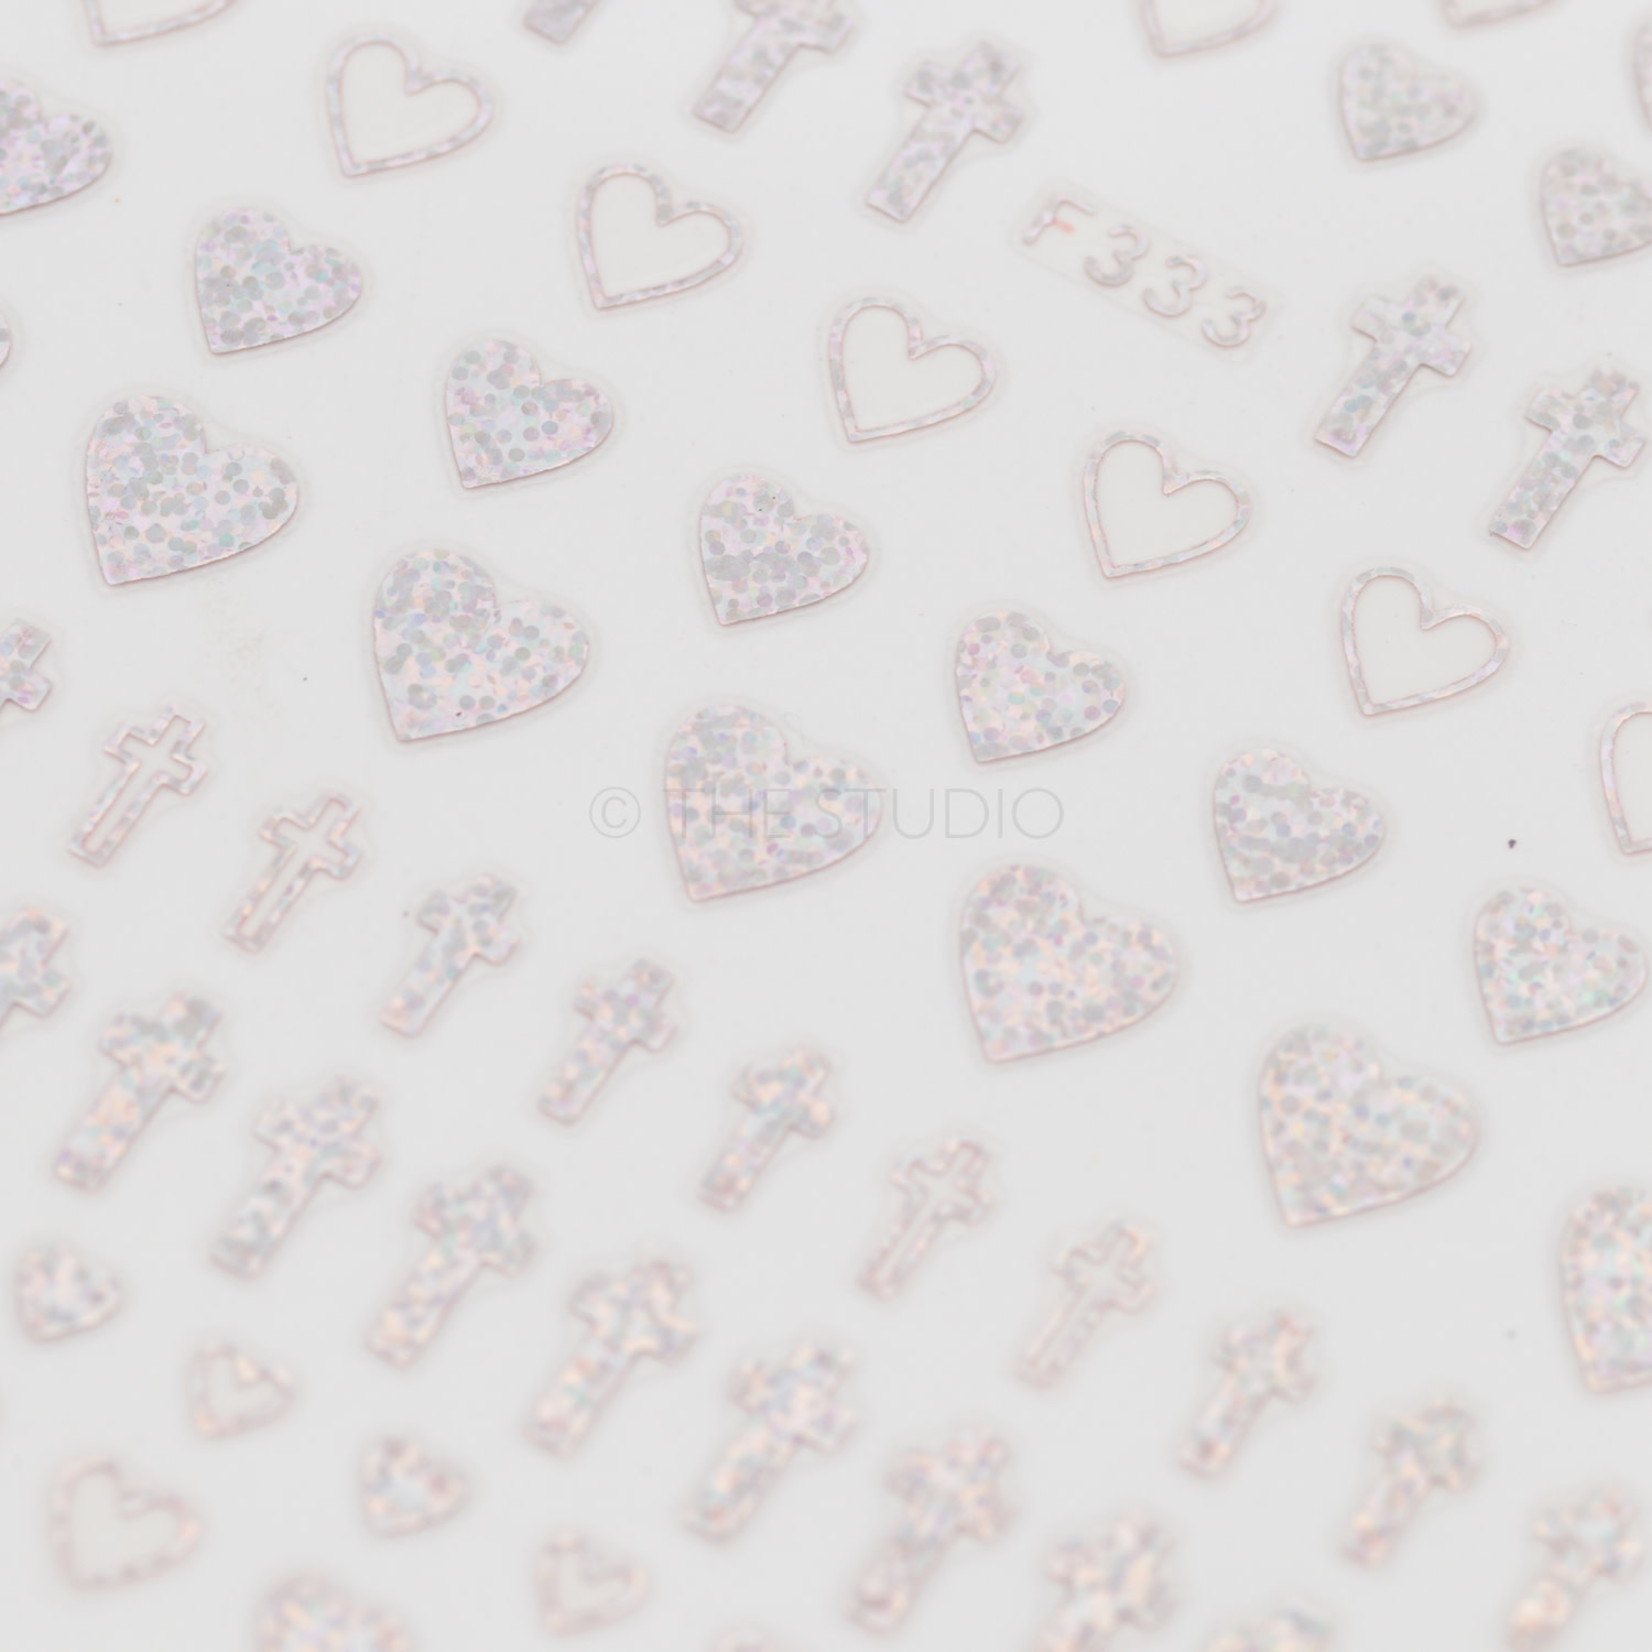 Miss Colour - Iridescent Cross Hearts Decal - F333